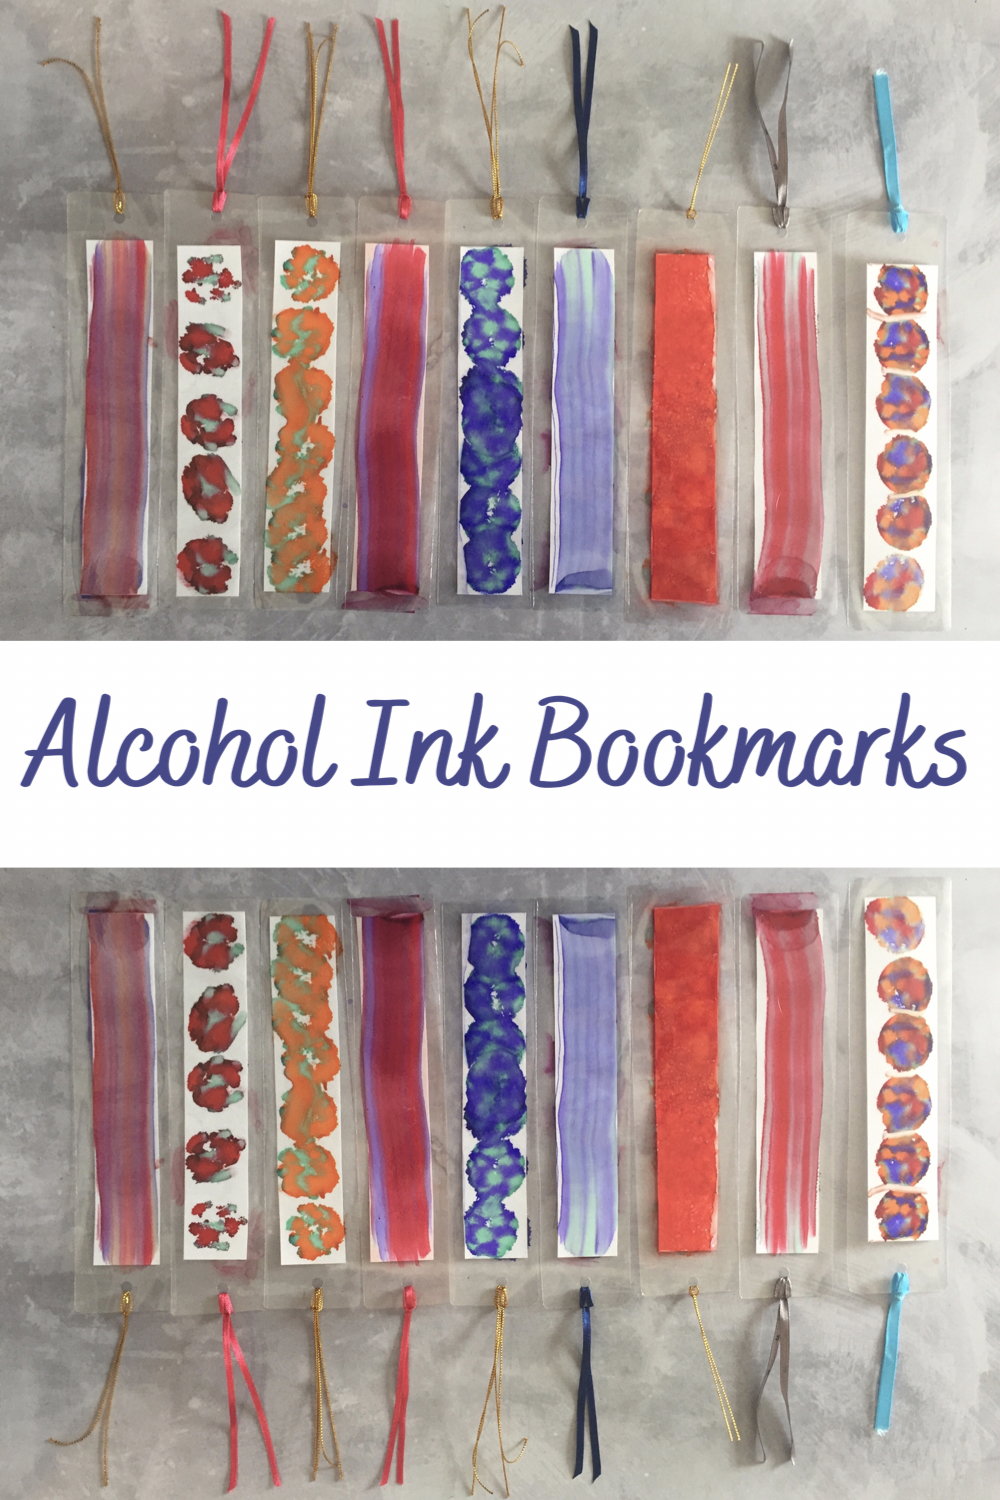 Alcohol ink bookmarks